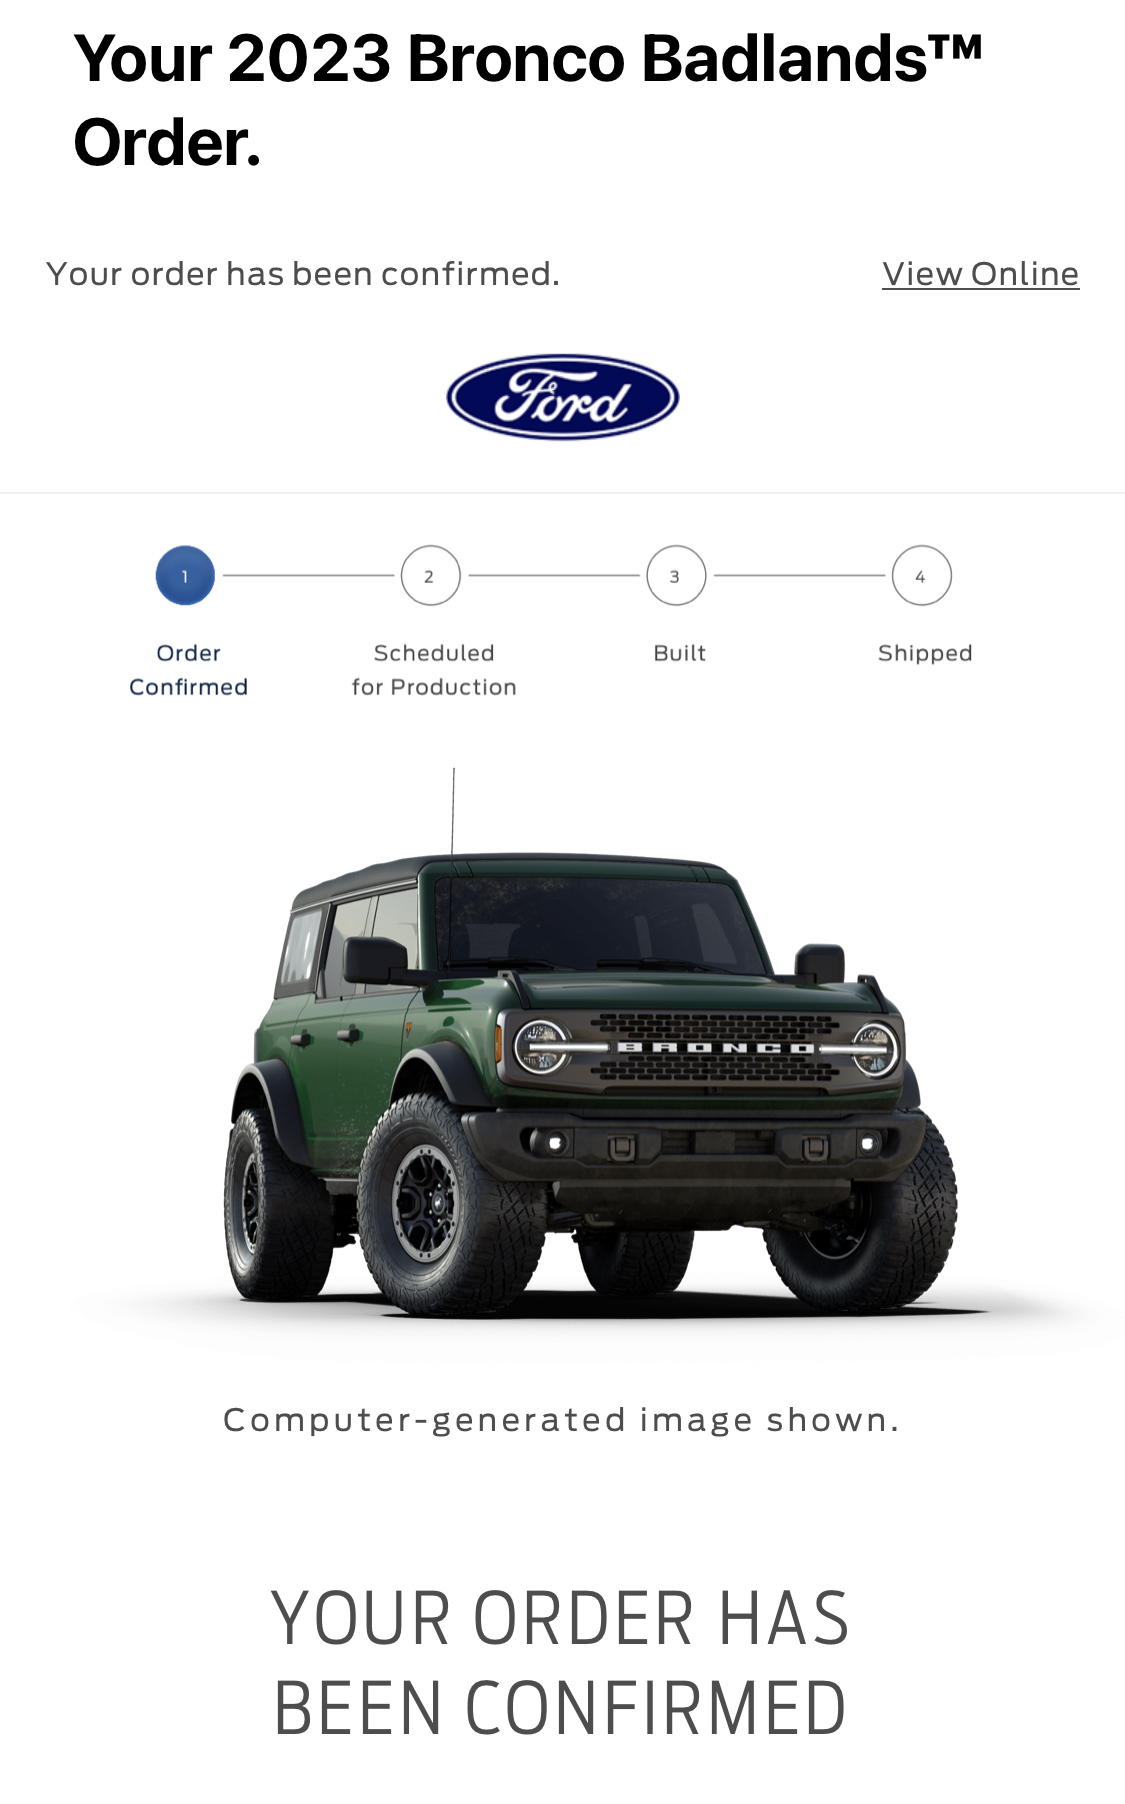 Ford Bronco Placed my 2023 Bronco Order! ... Post Yours! FC7ACC78-7FCC-4560-BBE0-D96010EE5BB1